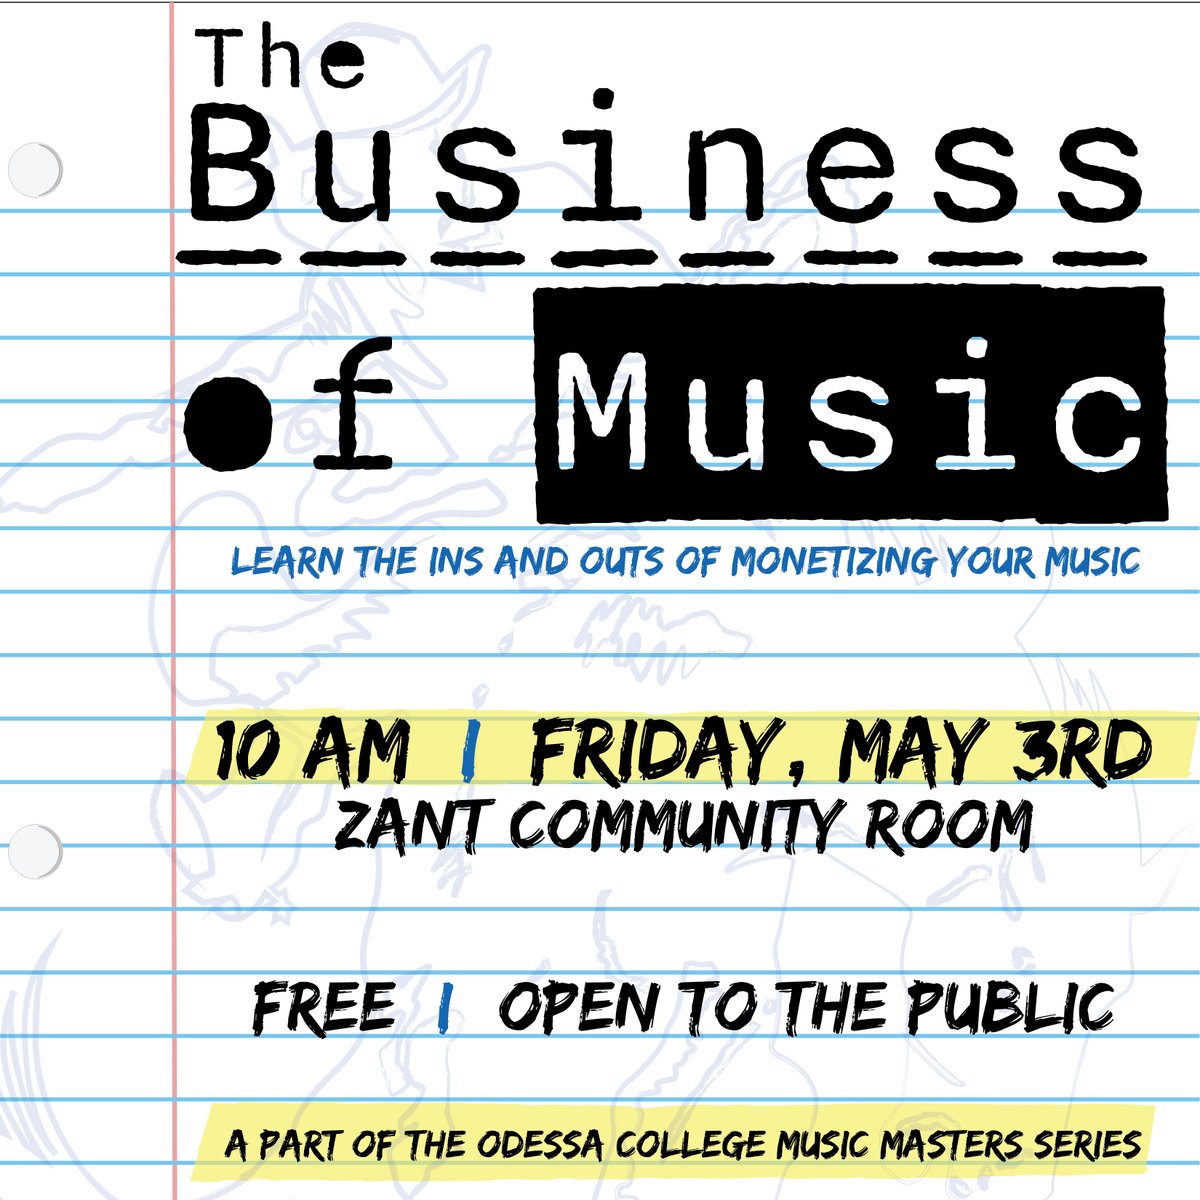 Join OC for our Music Masters Series: The Business of Music! 🎼 📆 Friday, May 3rd ⏰ 10 AM 📍 Zant Community Room 🎟 Open to the public